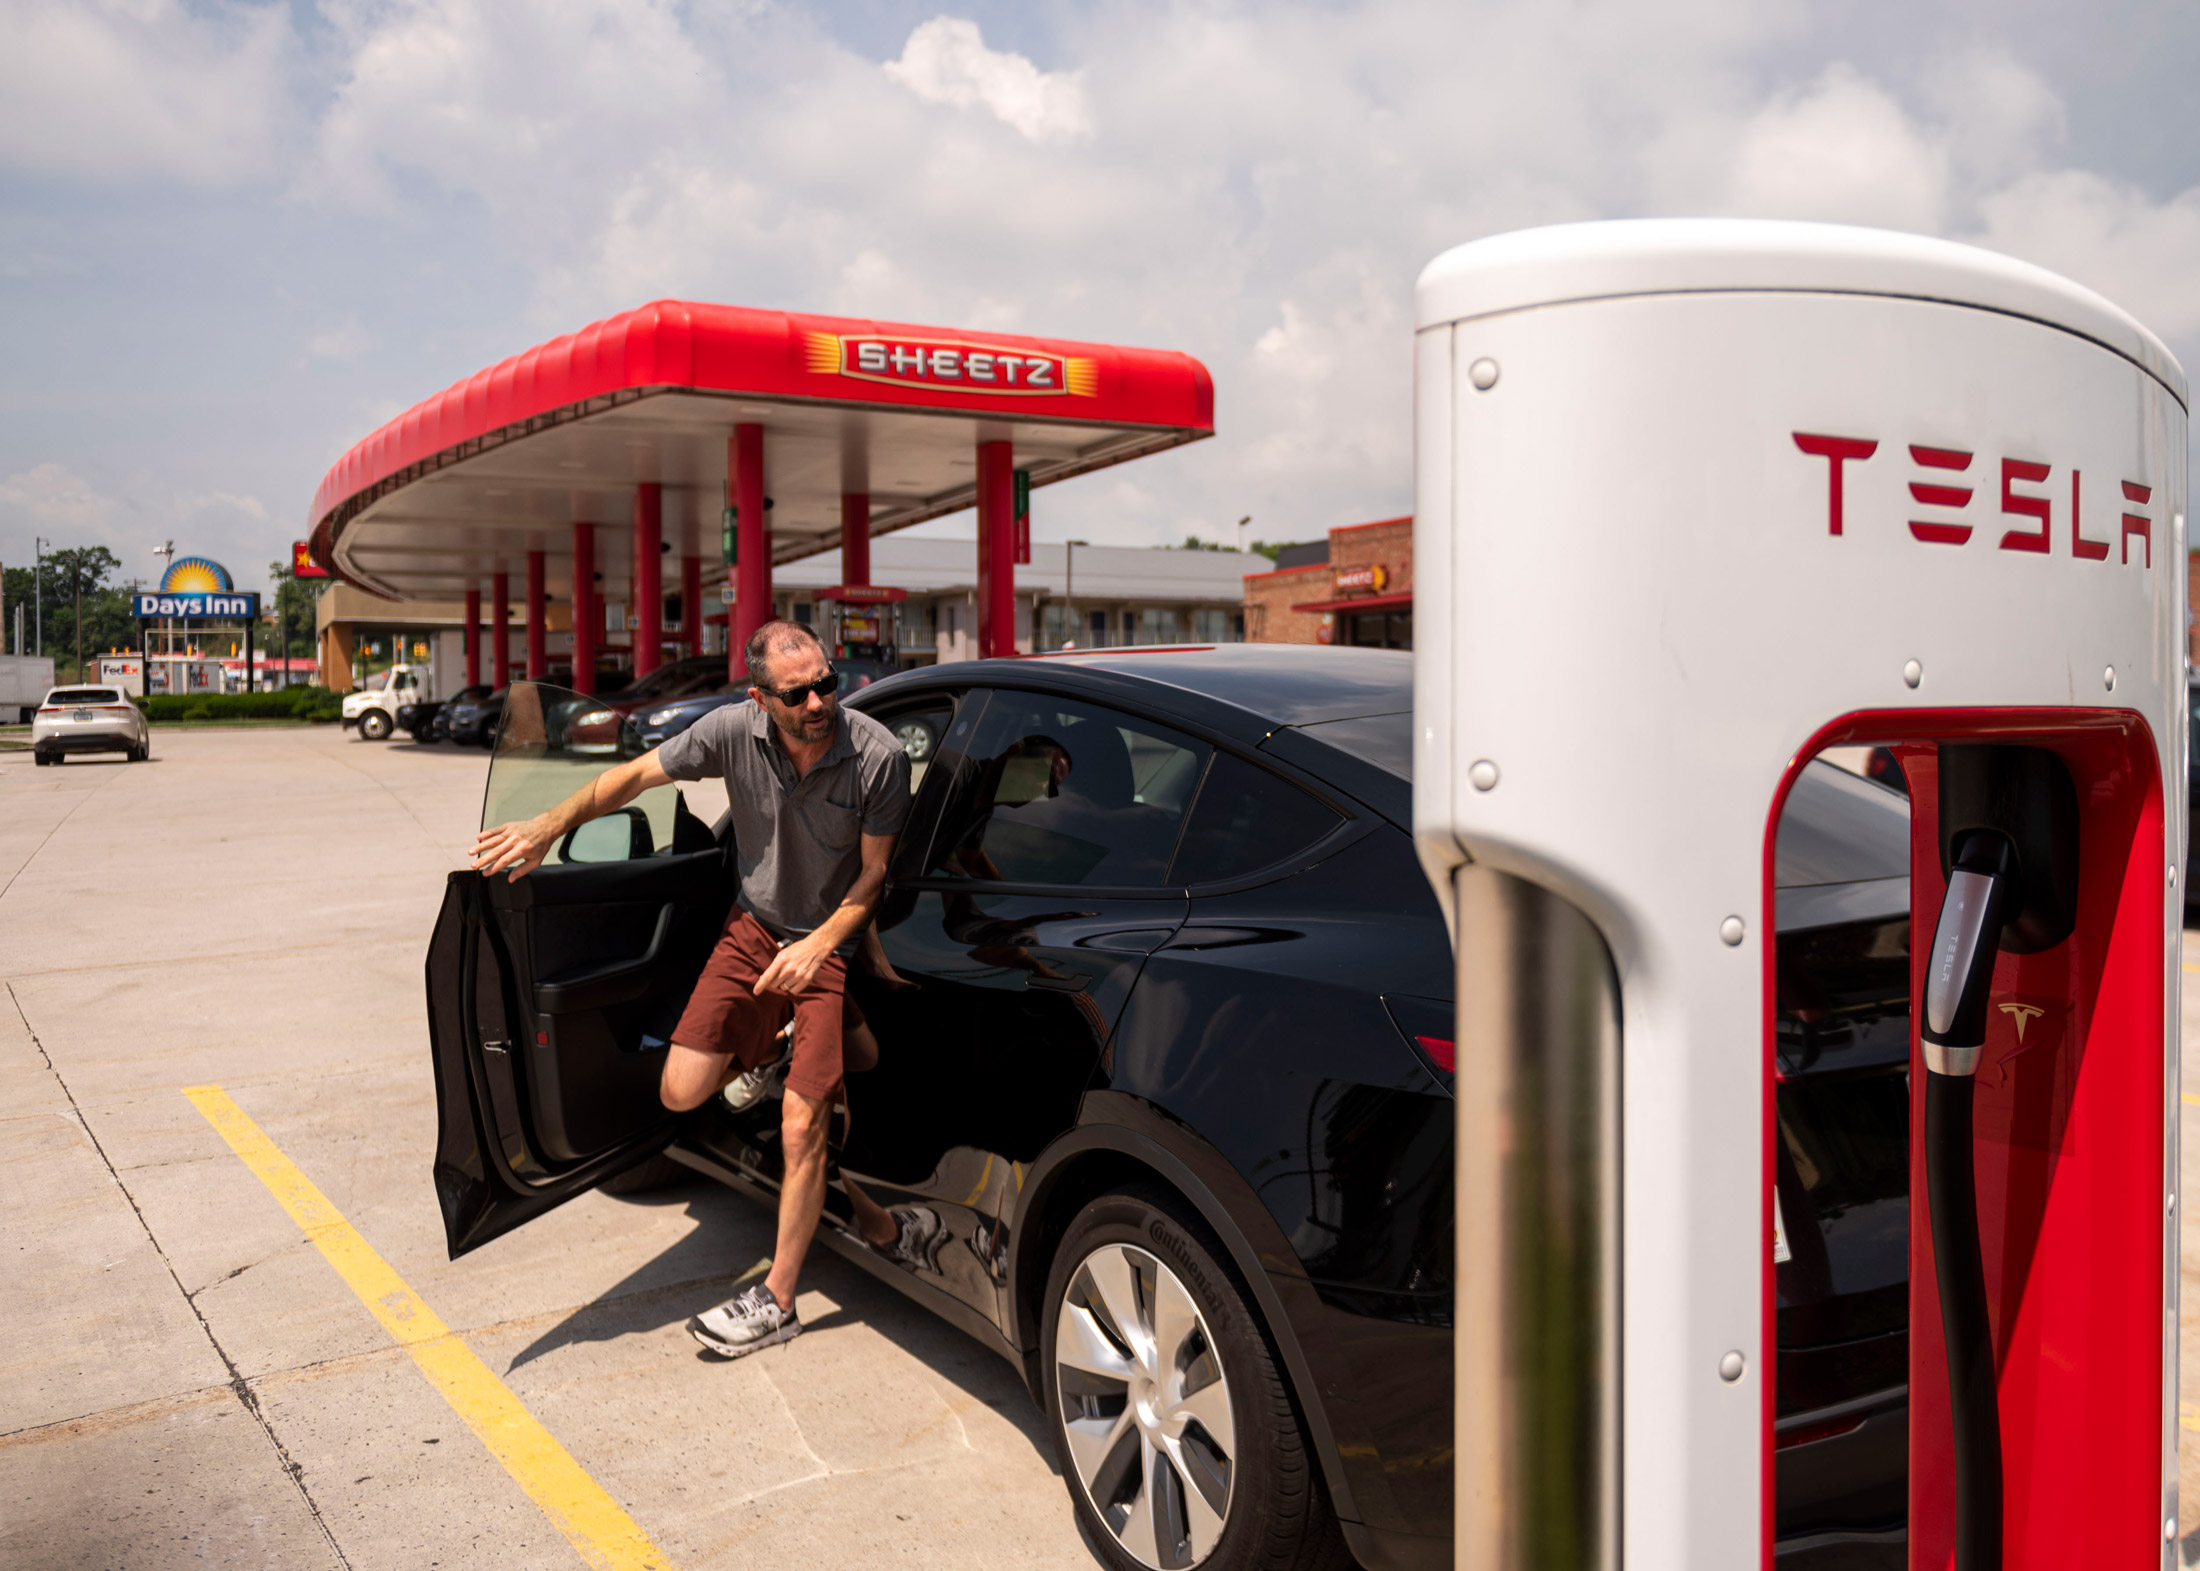 Sheetz and Tesla: Expanding Electric Vehicle Infrastructure with Charging Stations at Gas Stations